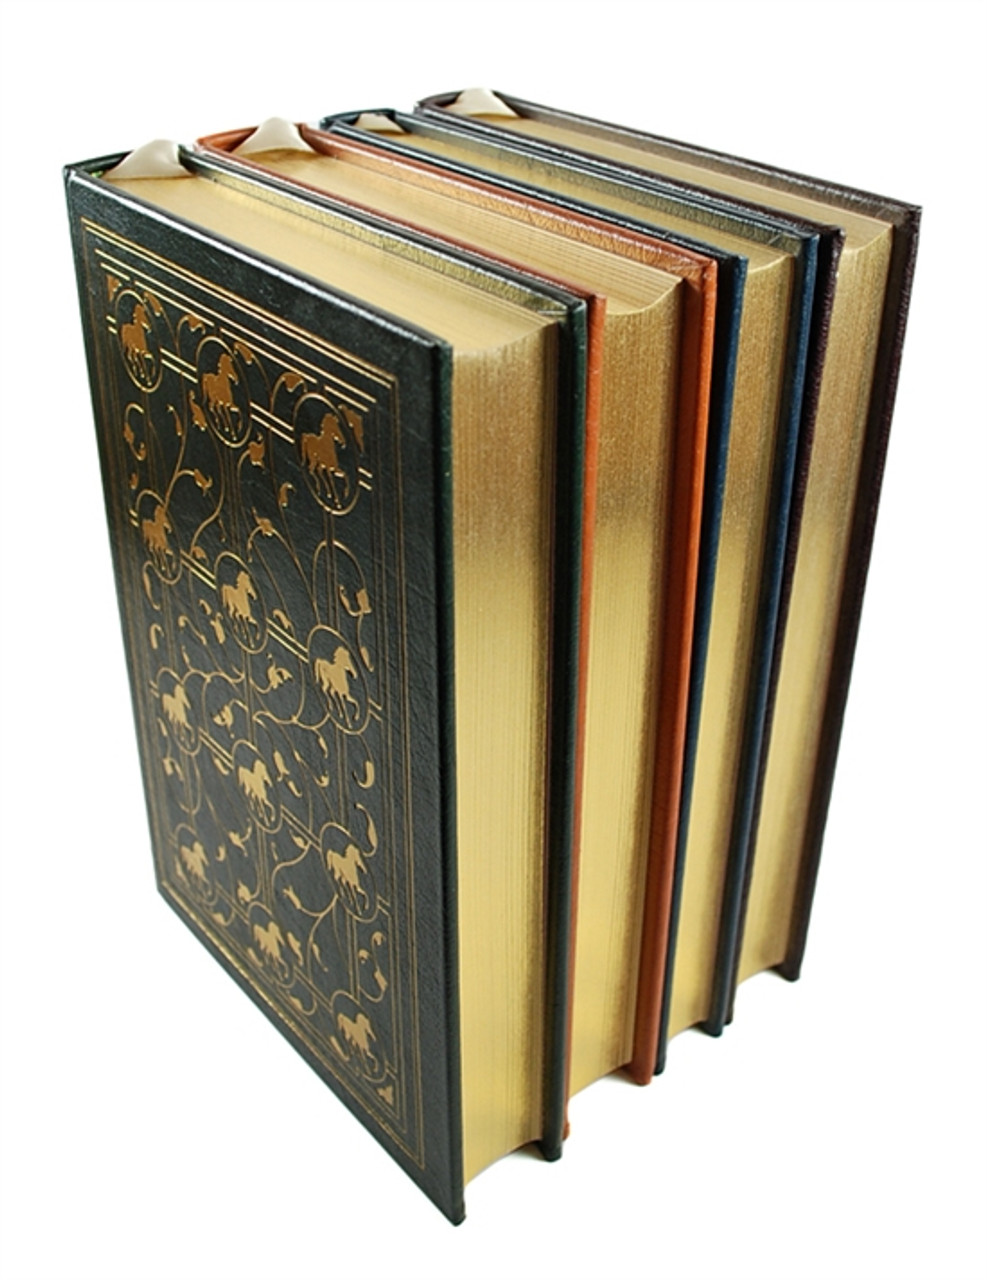 Easton Press "The Famous Horses Collection" Leather Bound Limited Edition, 4 Volume Matched Set